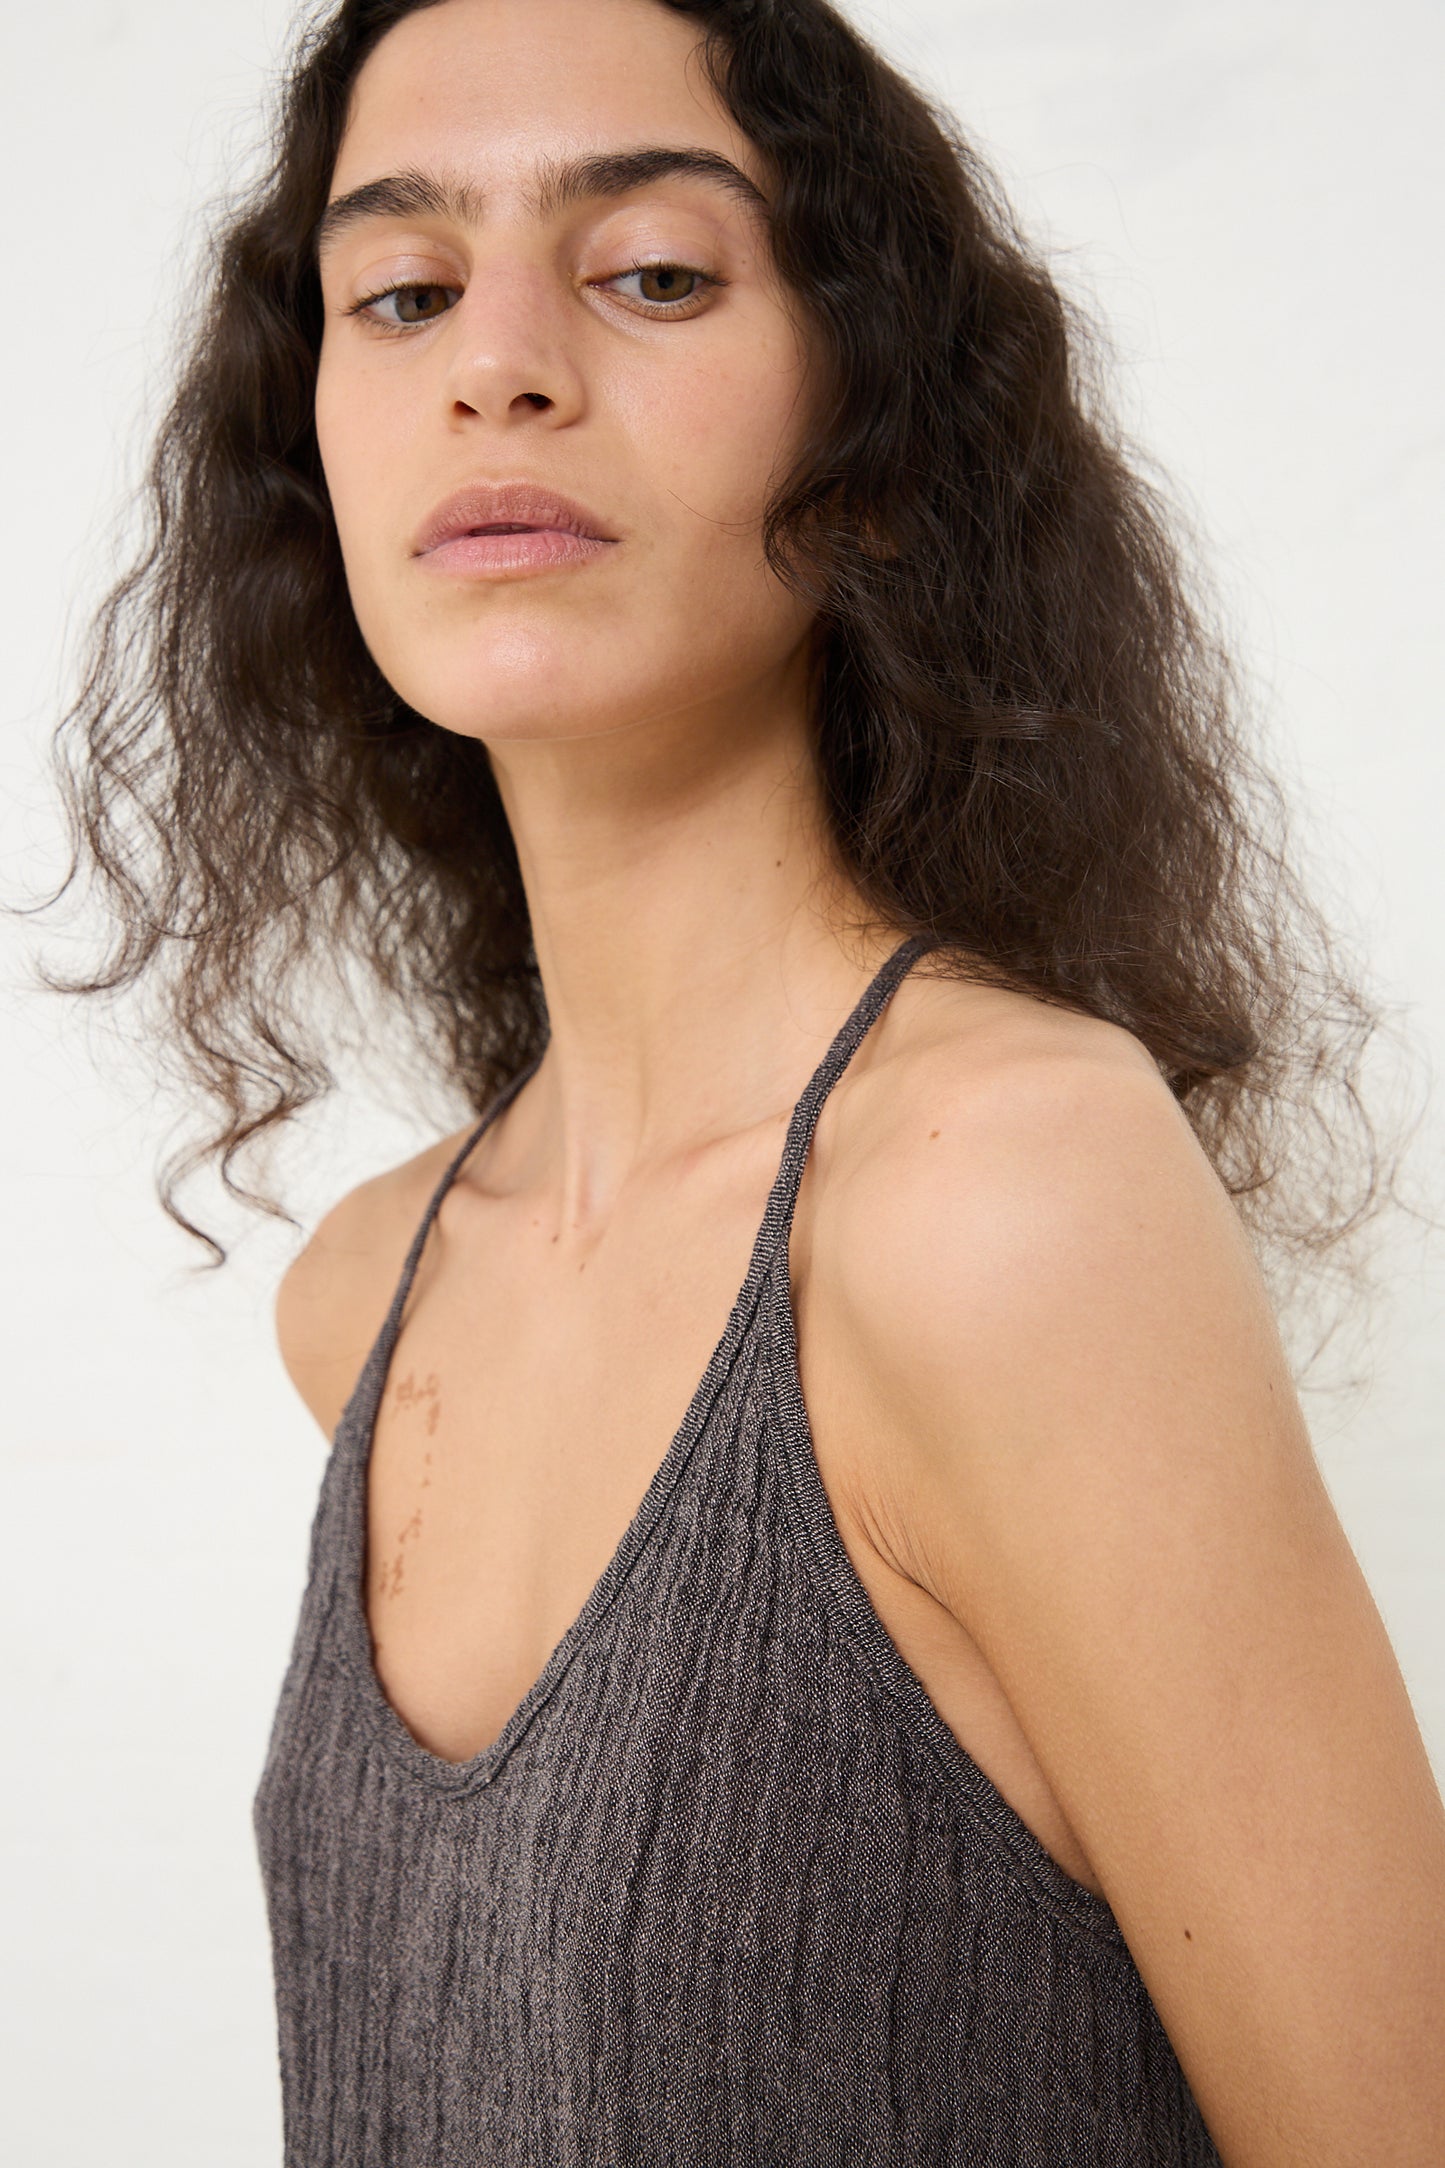 Woman posing in a Black Crane Linen Textured Camisole in Grey Navy top against a white background.